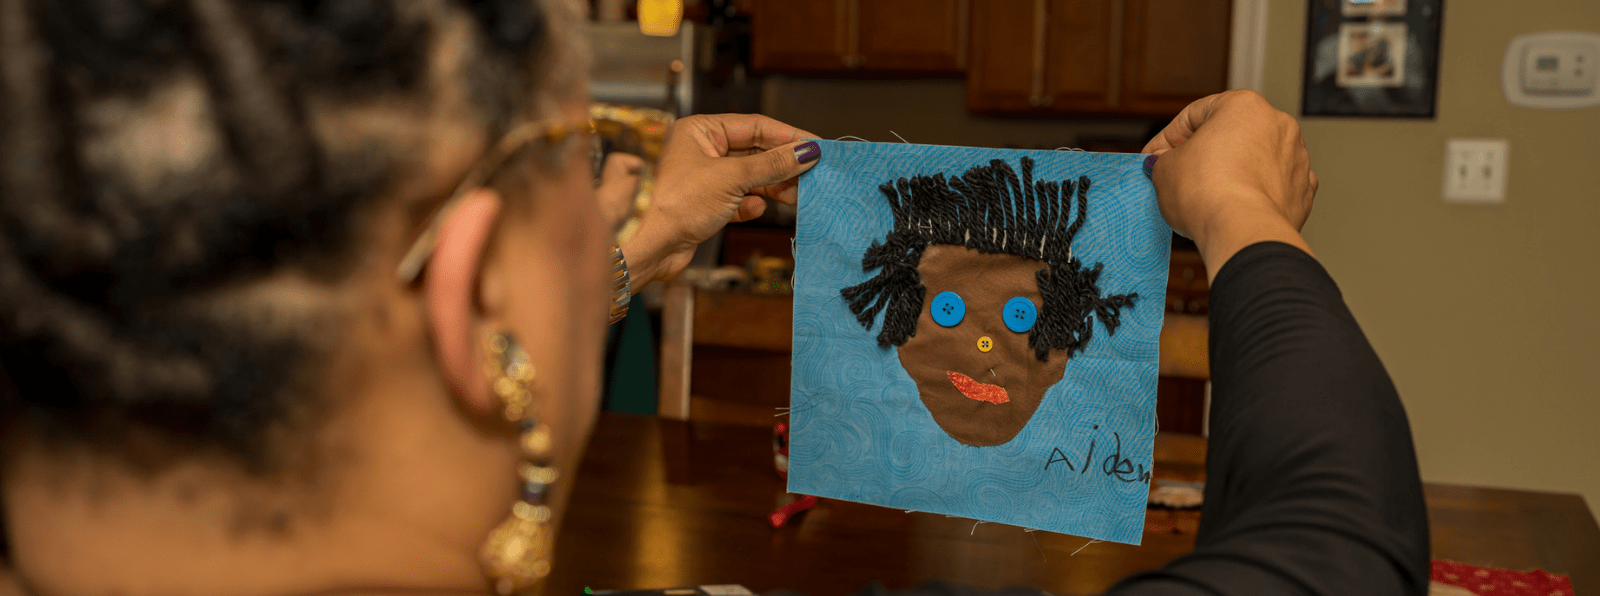 A person holding up a collage portrait labeled “Aiden.”